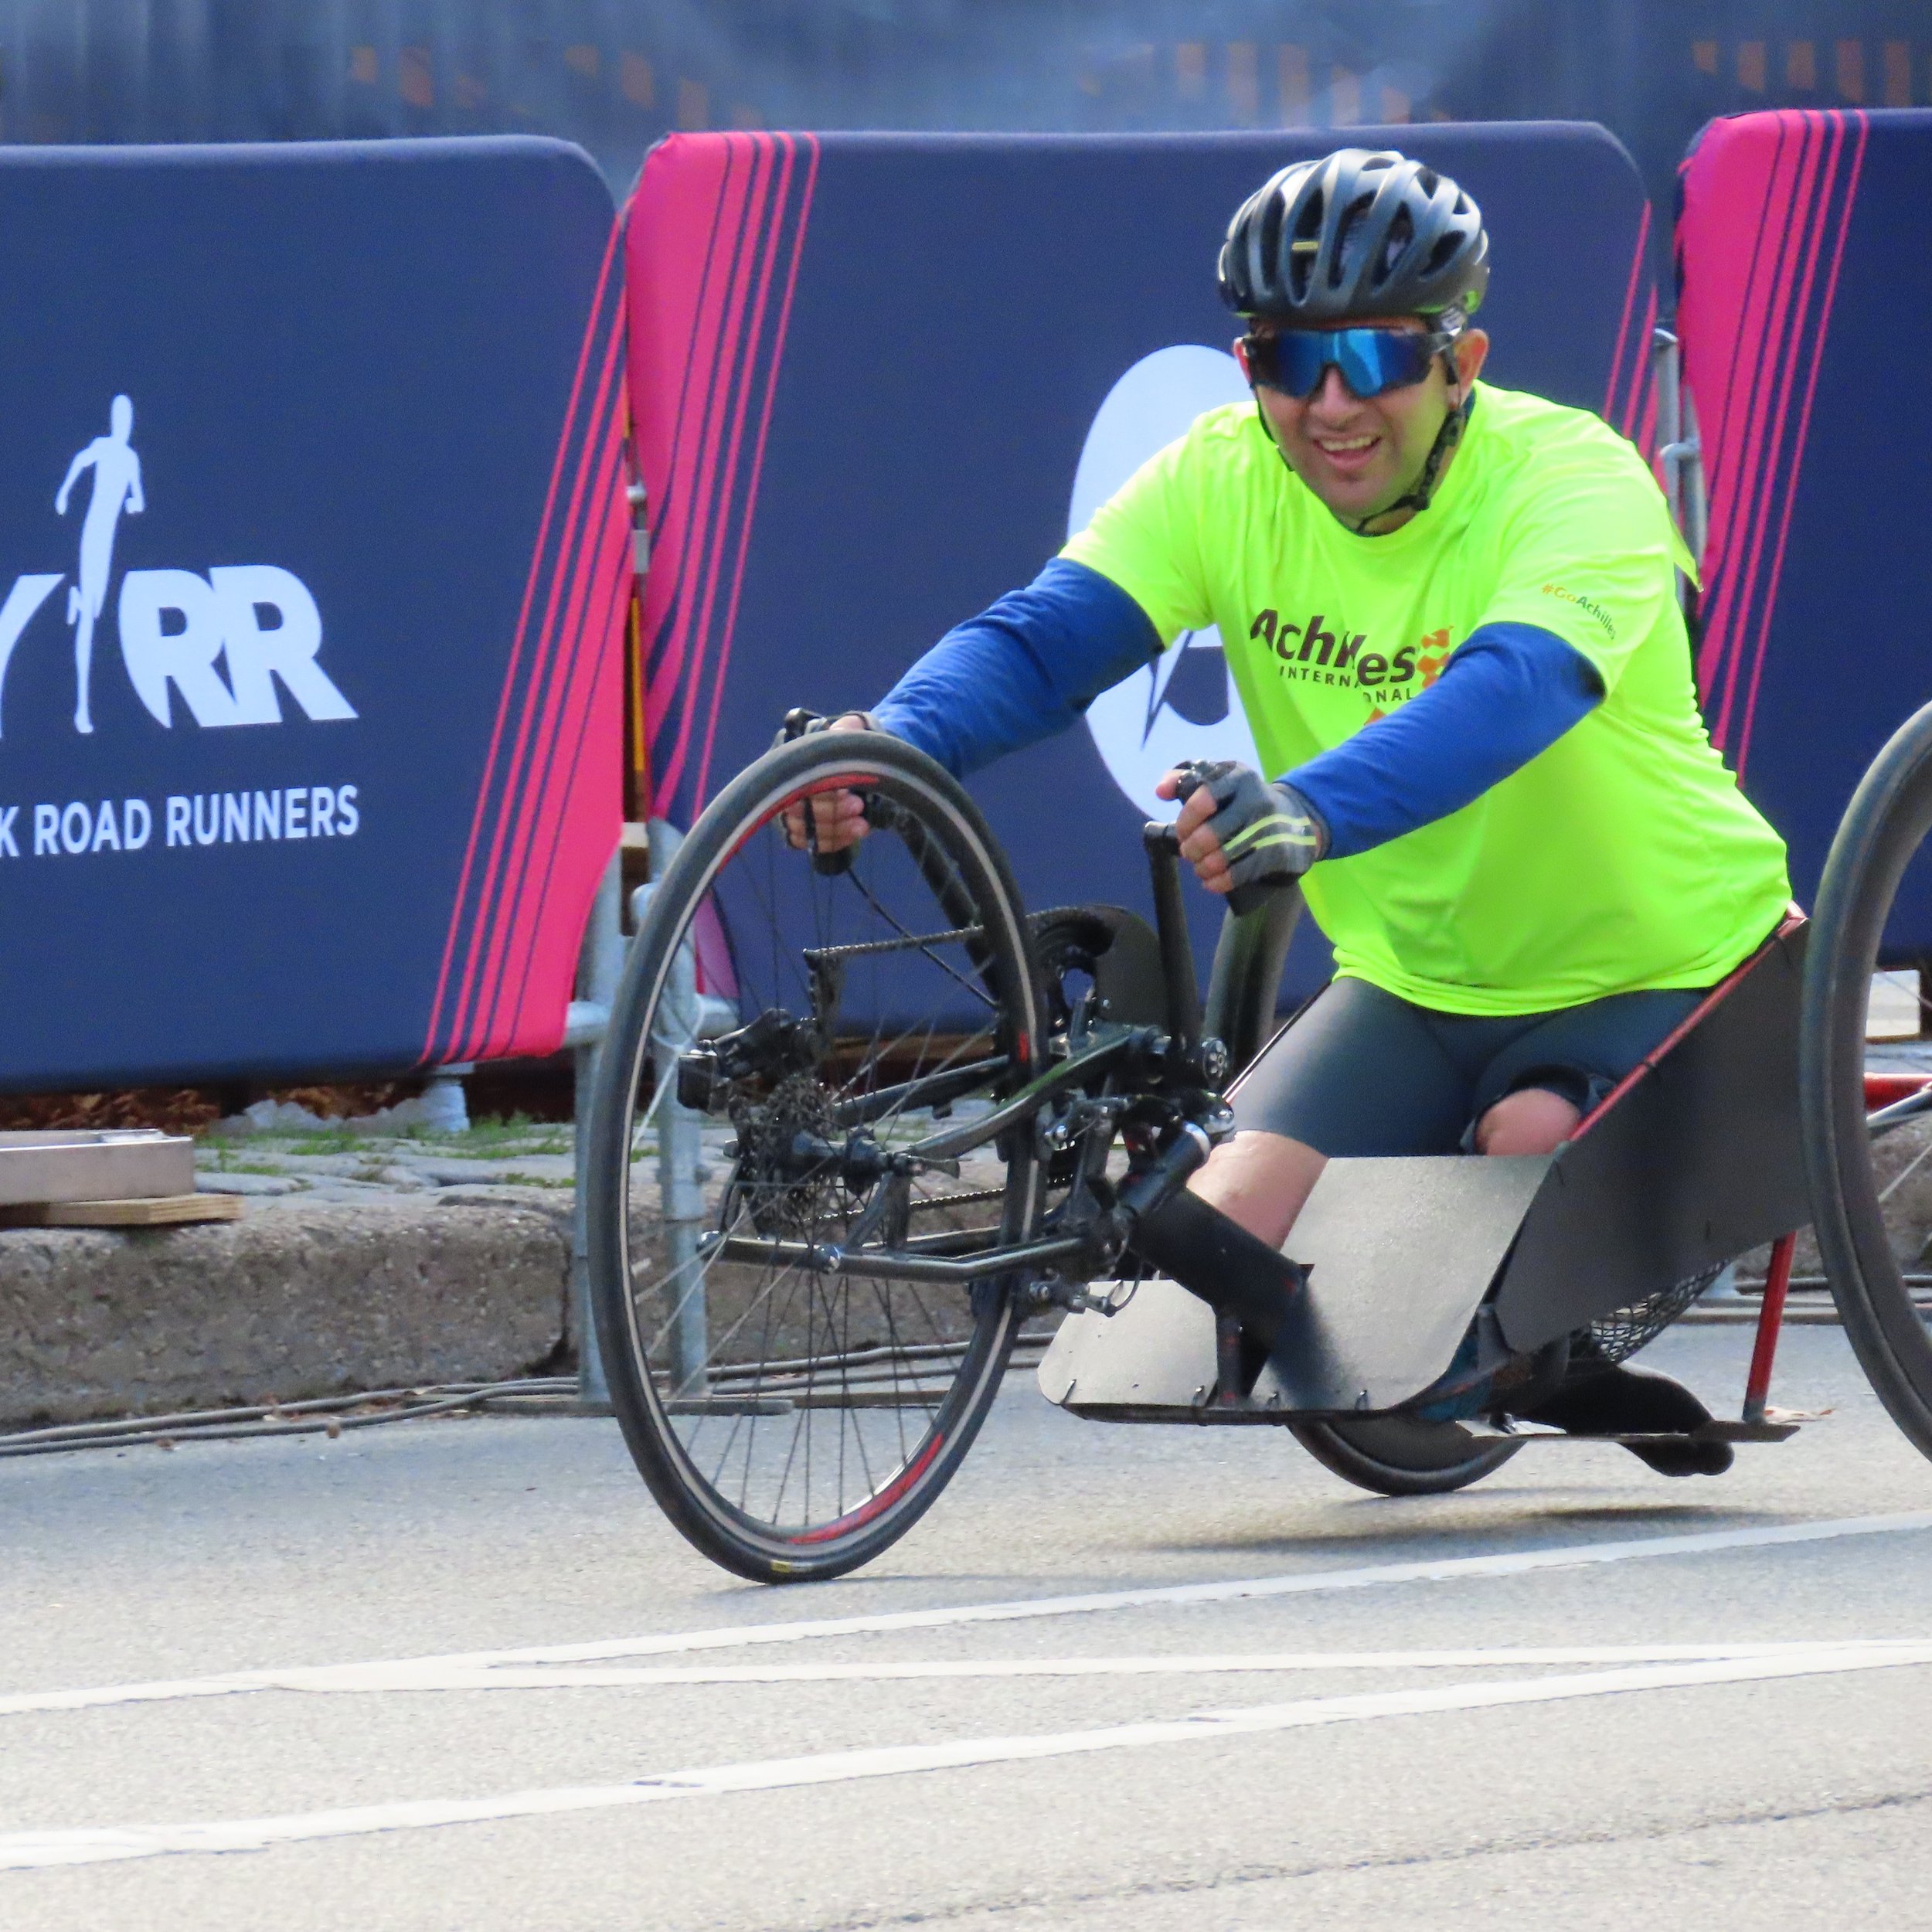  Achilles athlete smiling on his handcycle on the course  